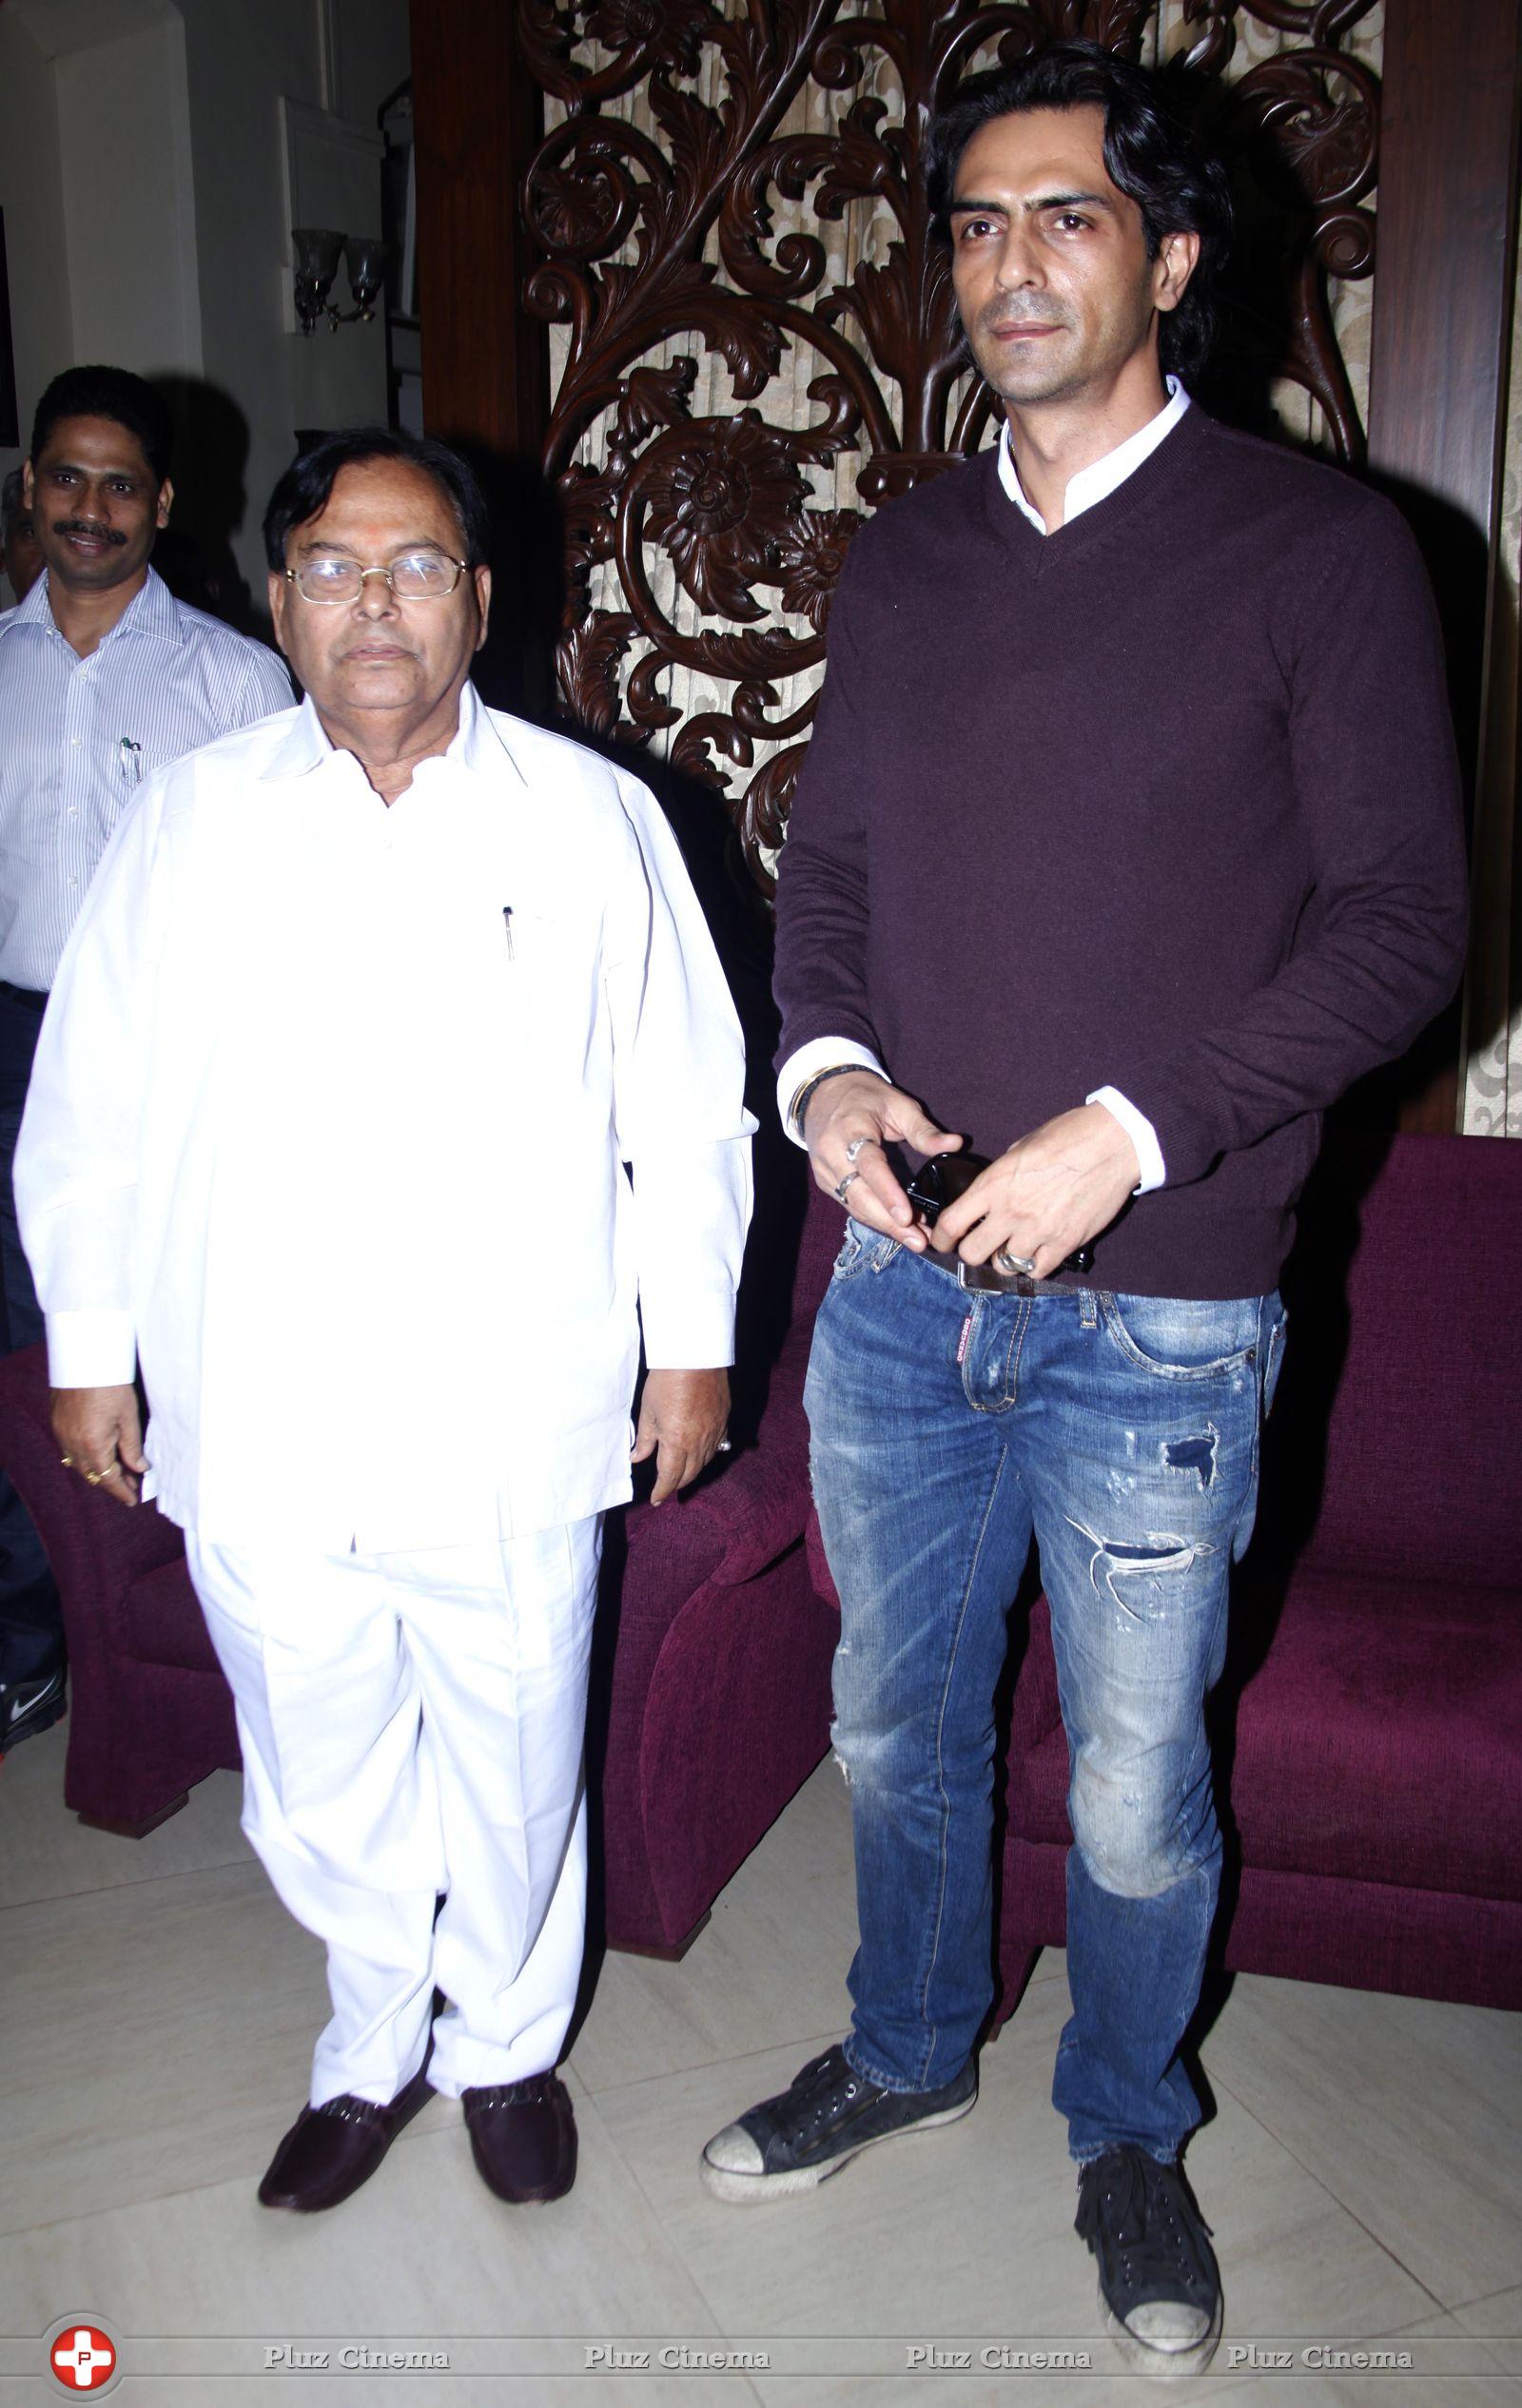 Arjun Rampal - Arjun Rampal meets Minister over elephant Sunder abuse case Photos | Picture 700206